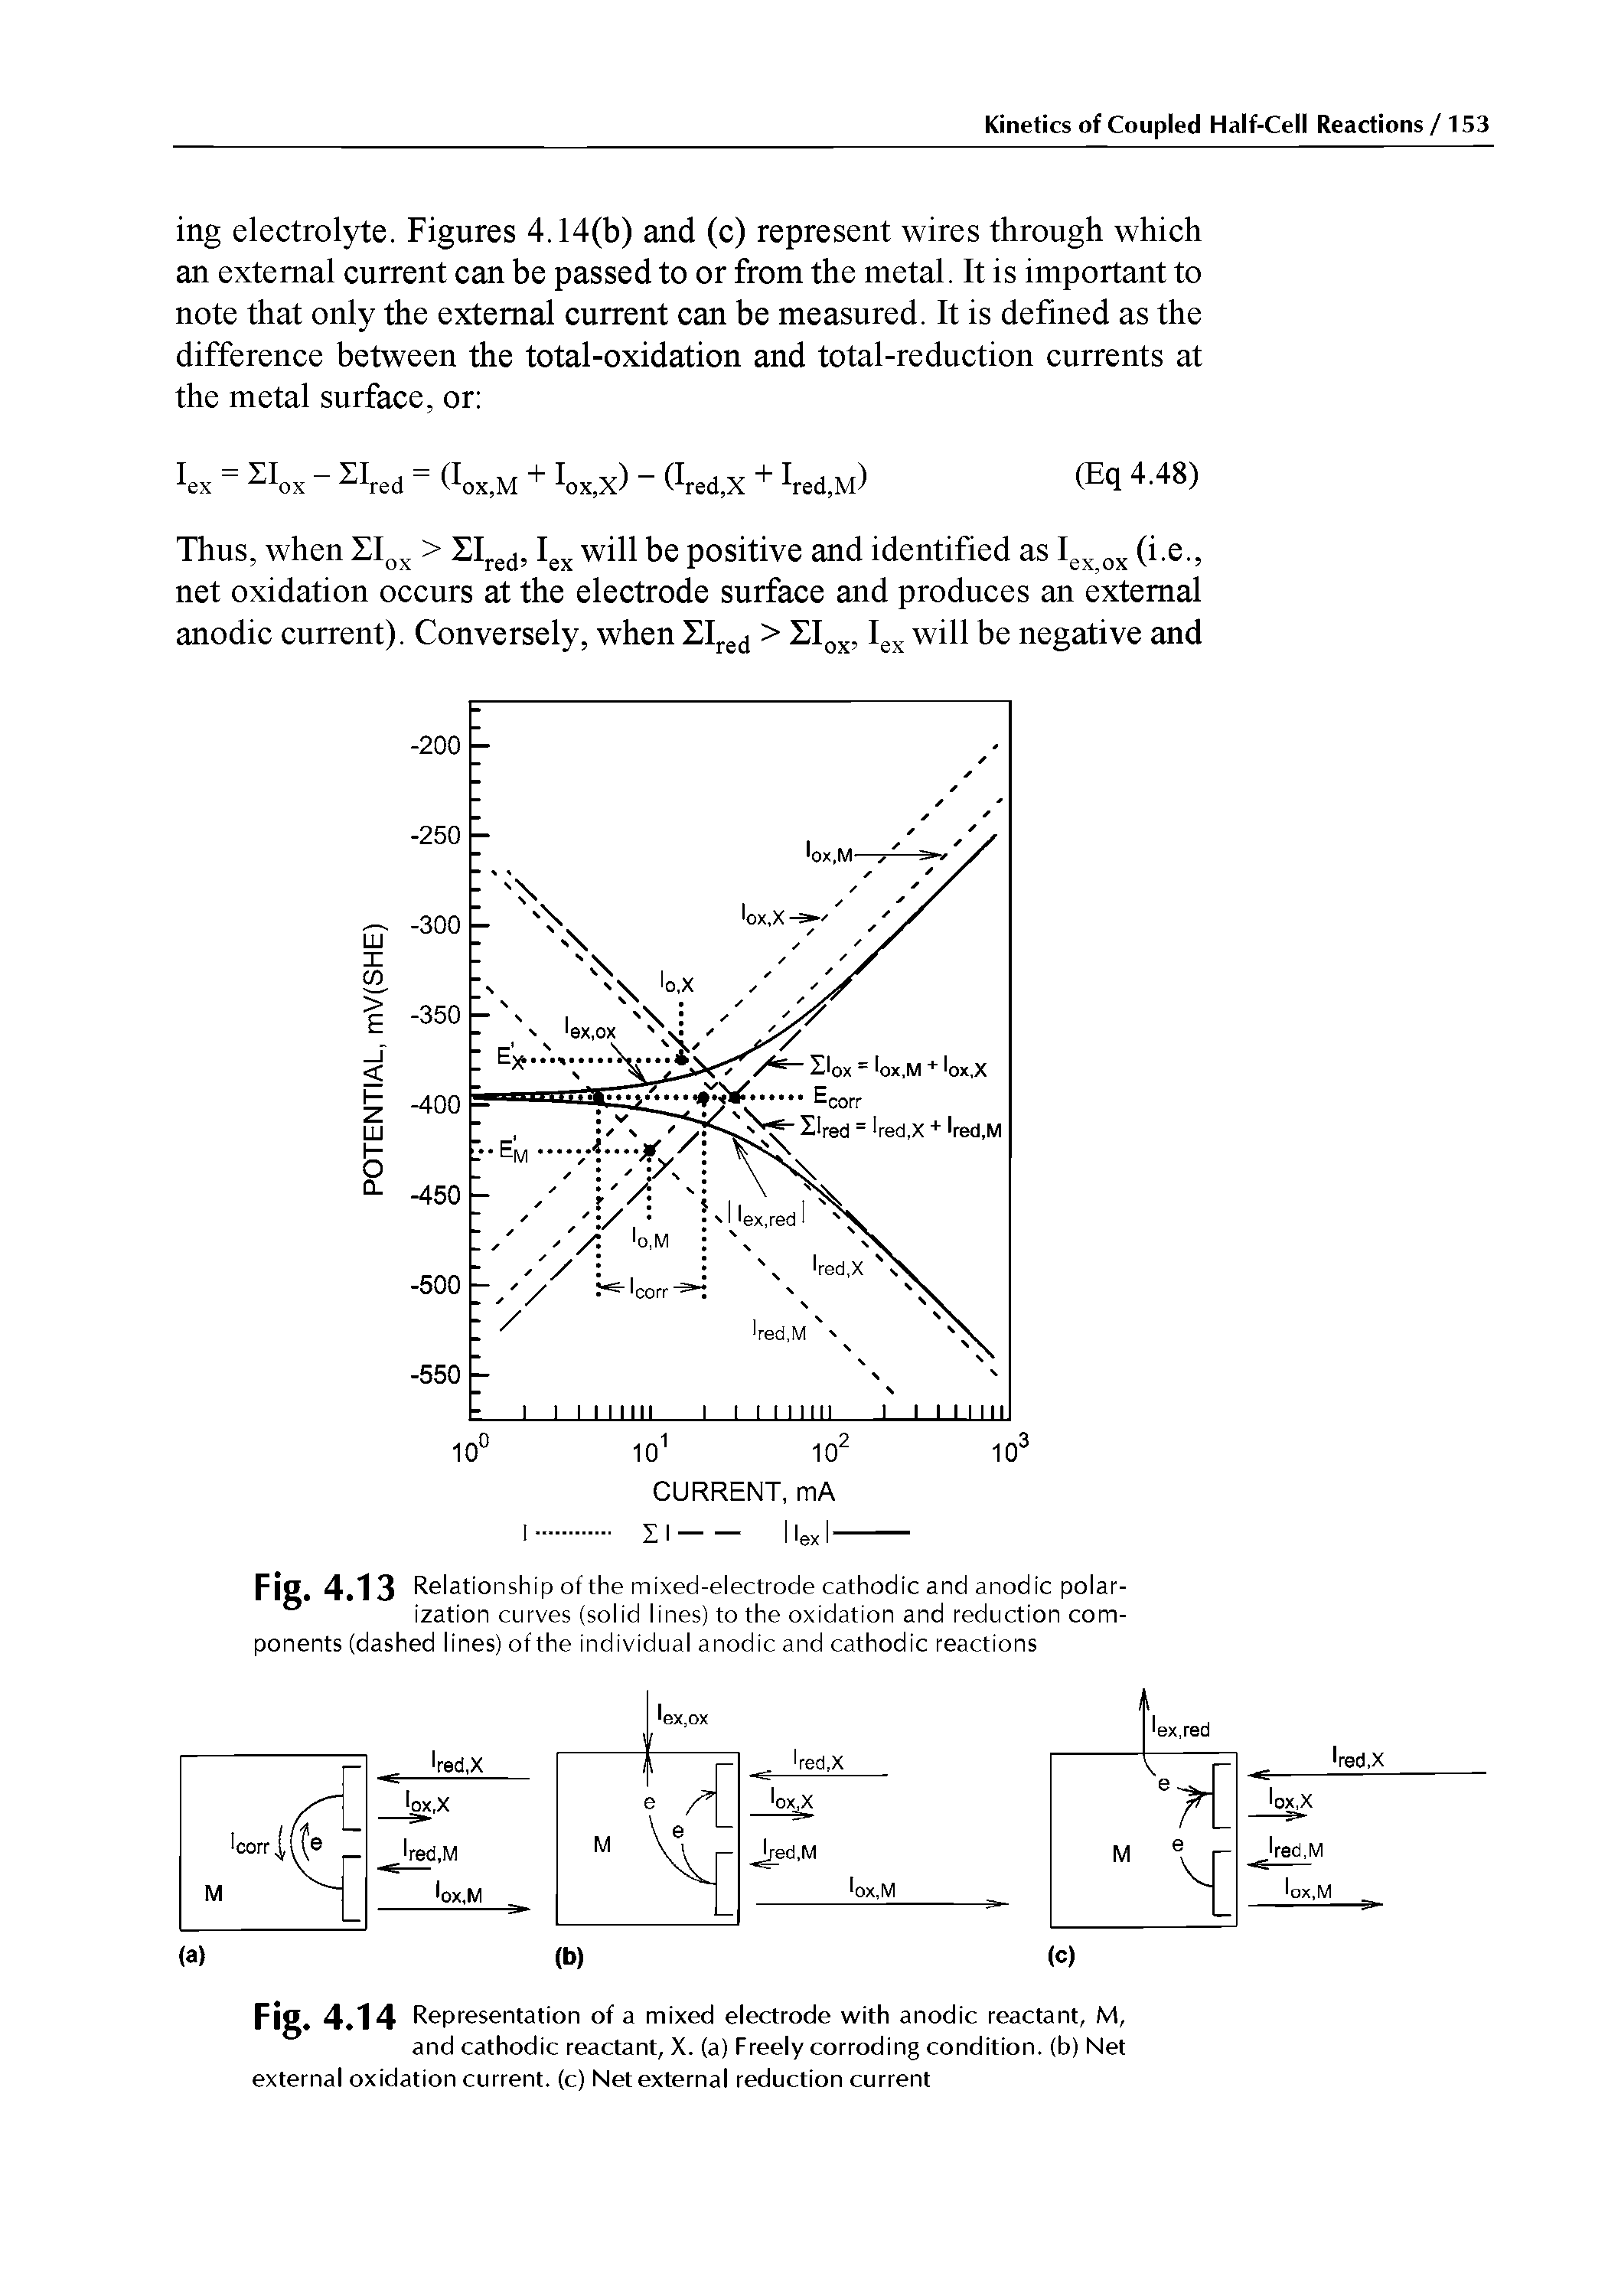 Fig. 4.13 Relationship of the mixed-electrode cathodic and anodic polarization curves (solid lines) to the oxidation and reduction components (dashed lines) of the individual anodic and cathodic reactions...